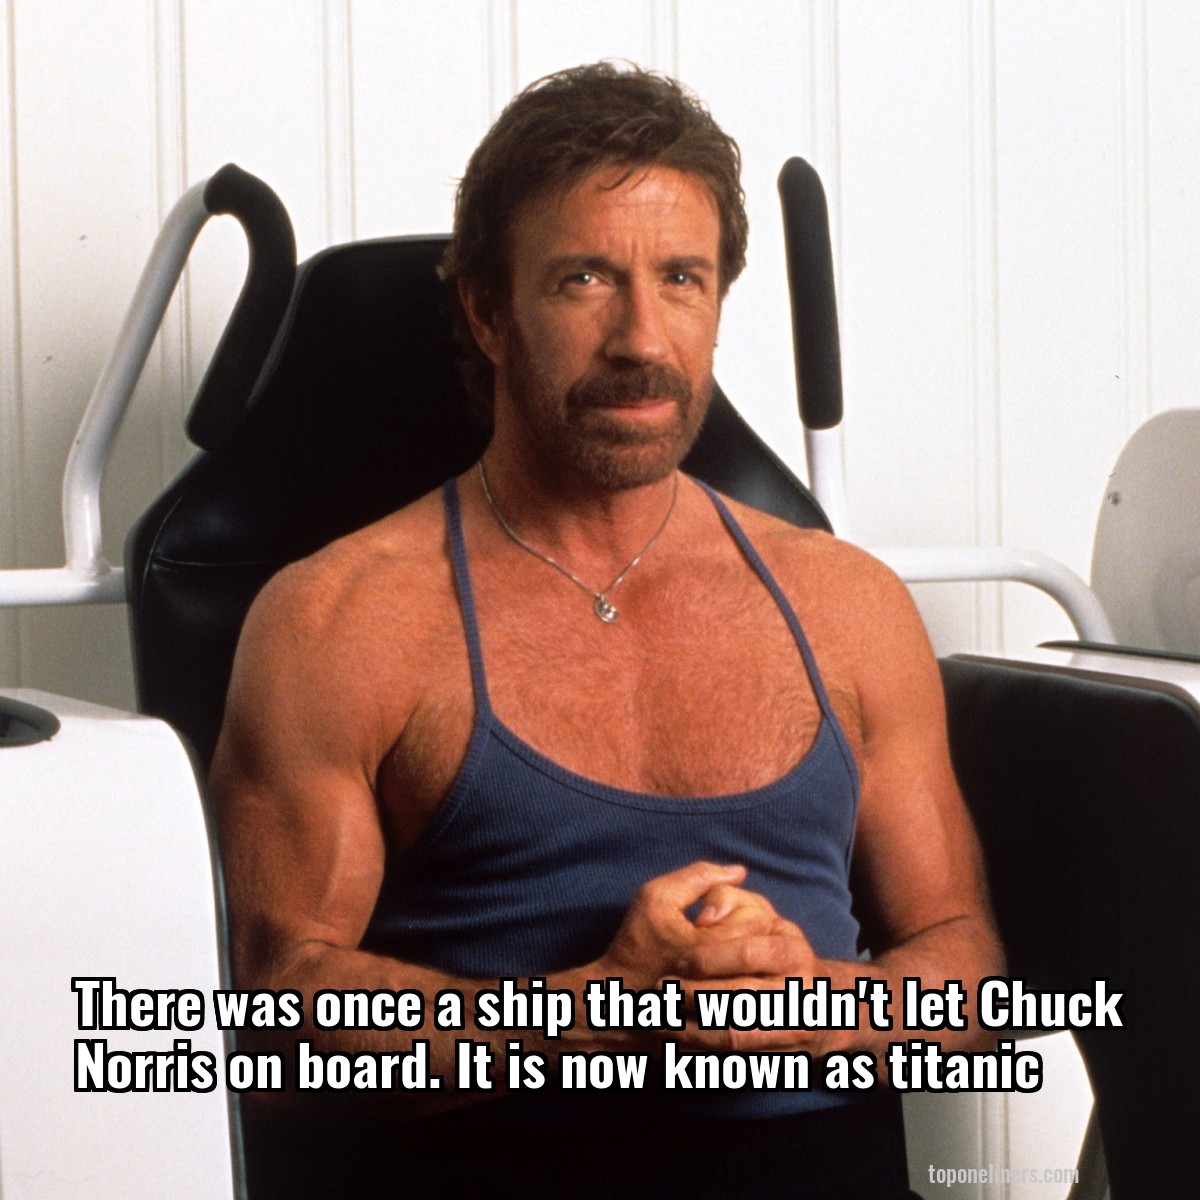 There was once a ship that wouldn't let Chuck Norris on board. It is now known as titanic